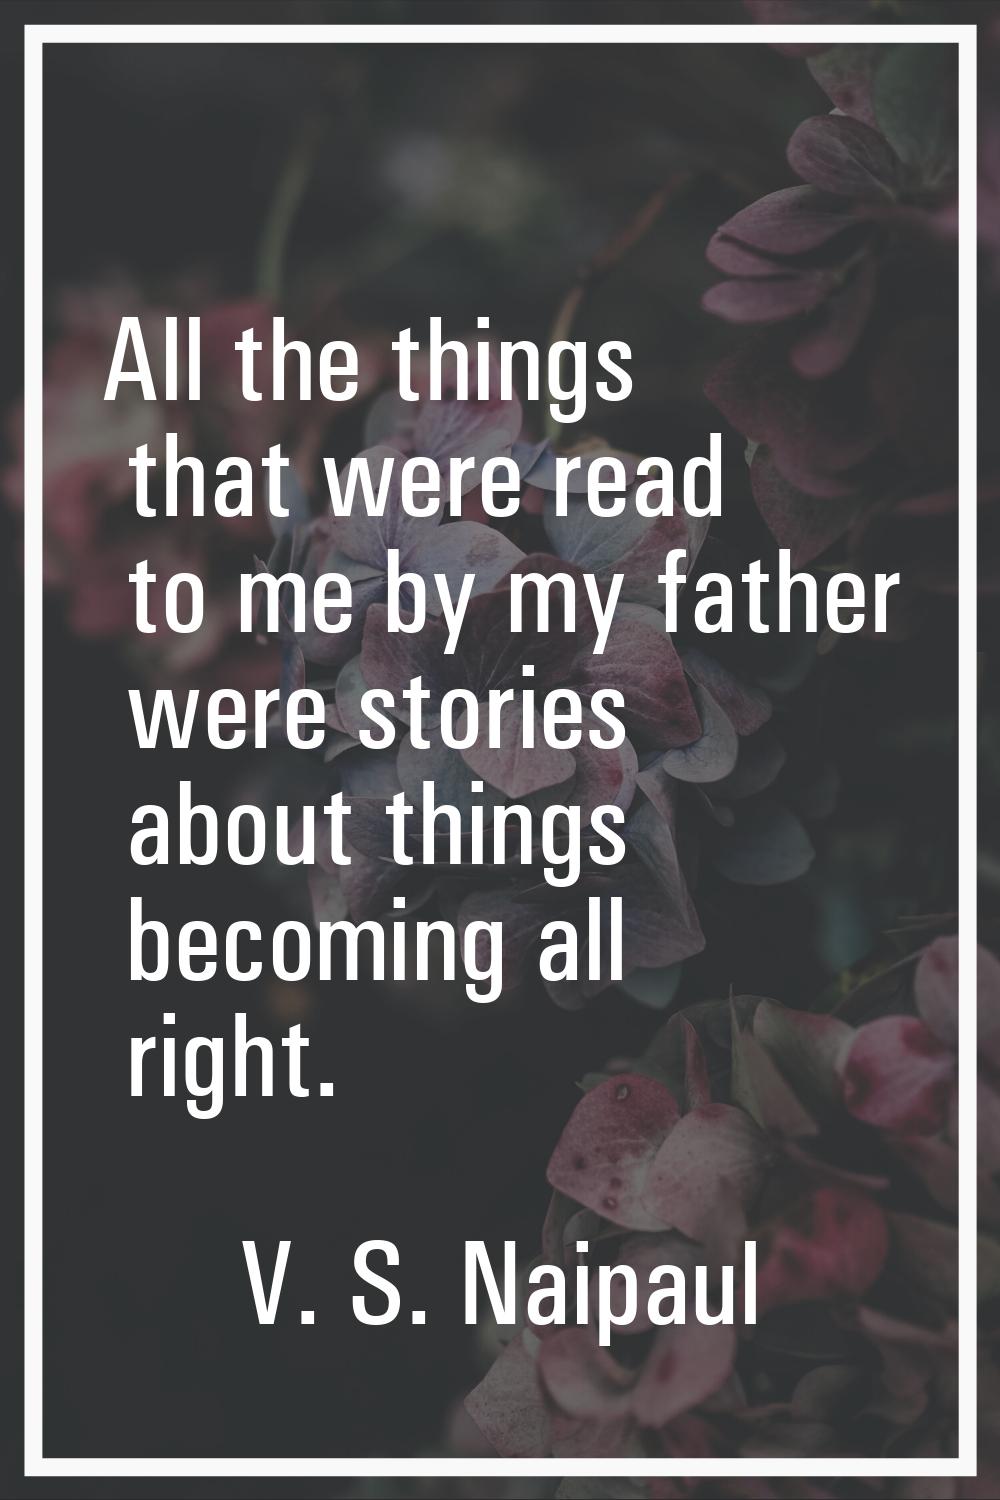 All the things that were read to me by my father were stories about things becoming all right.